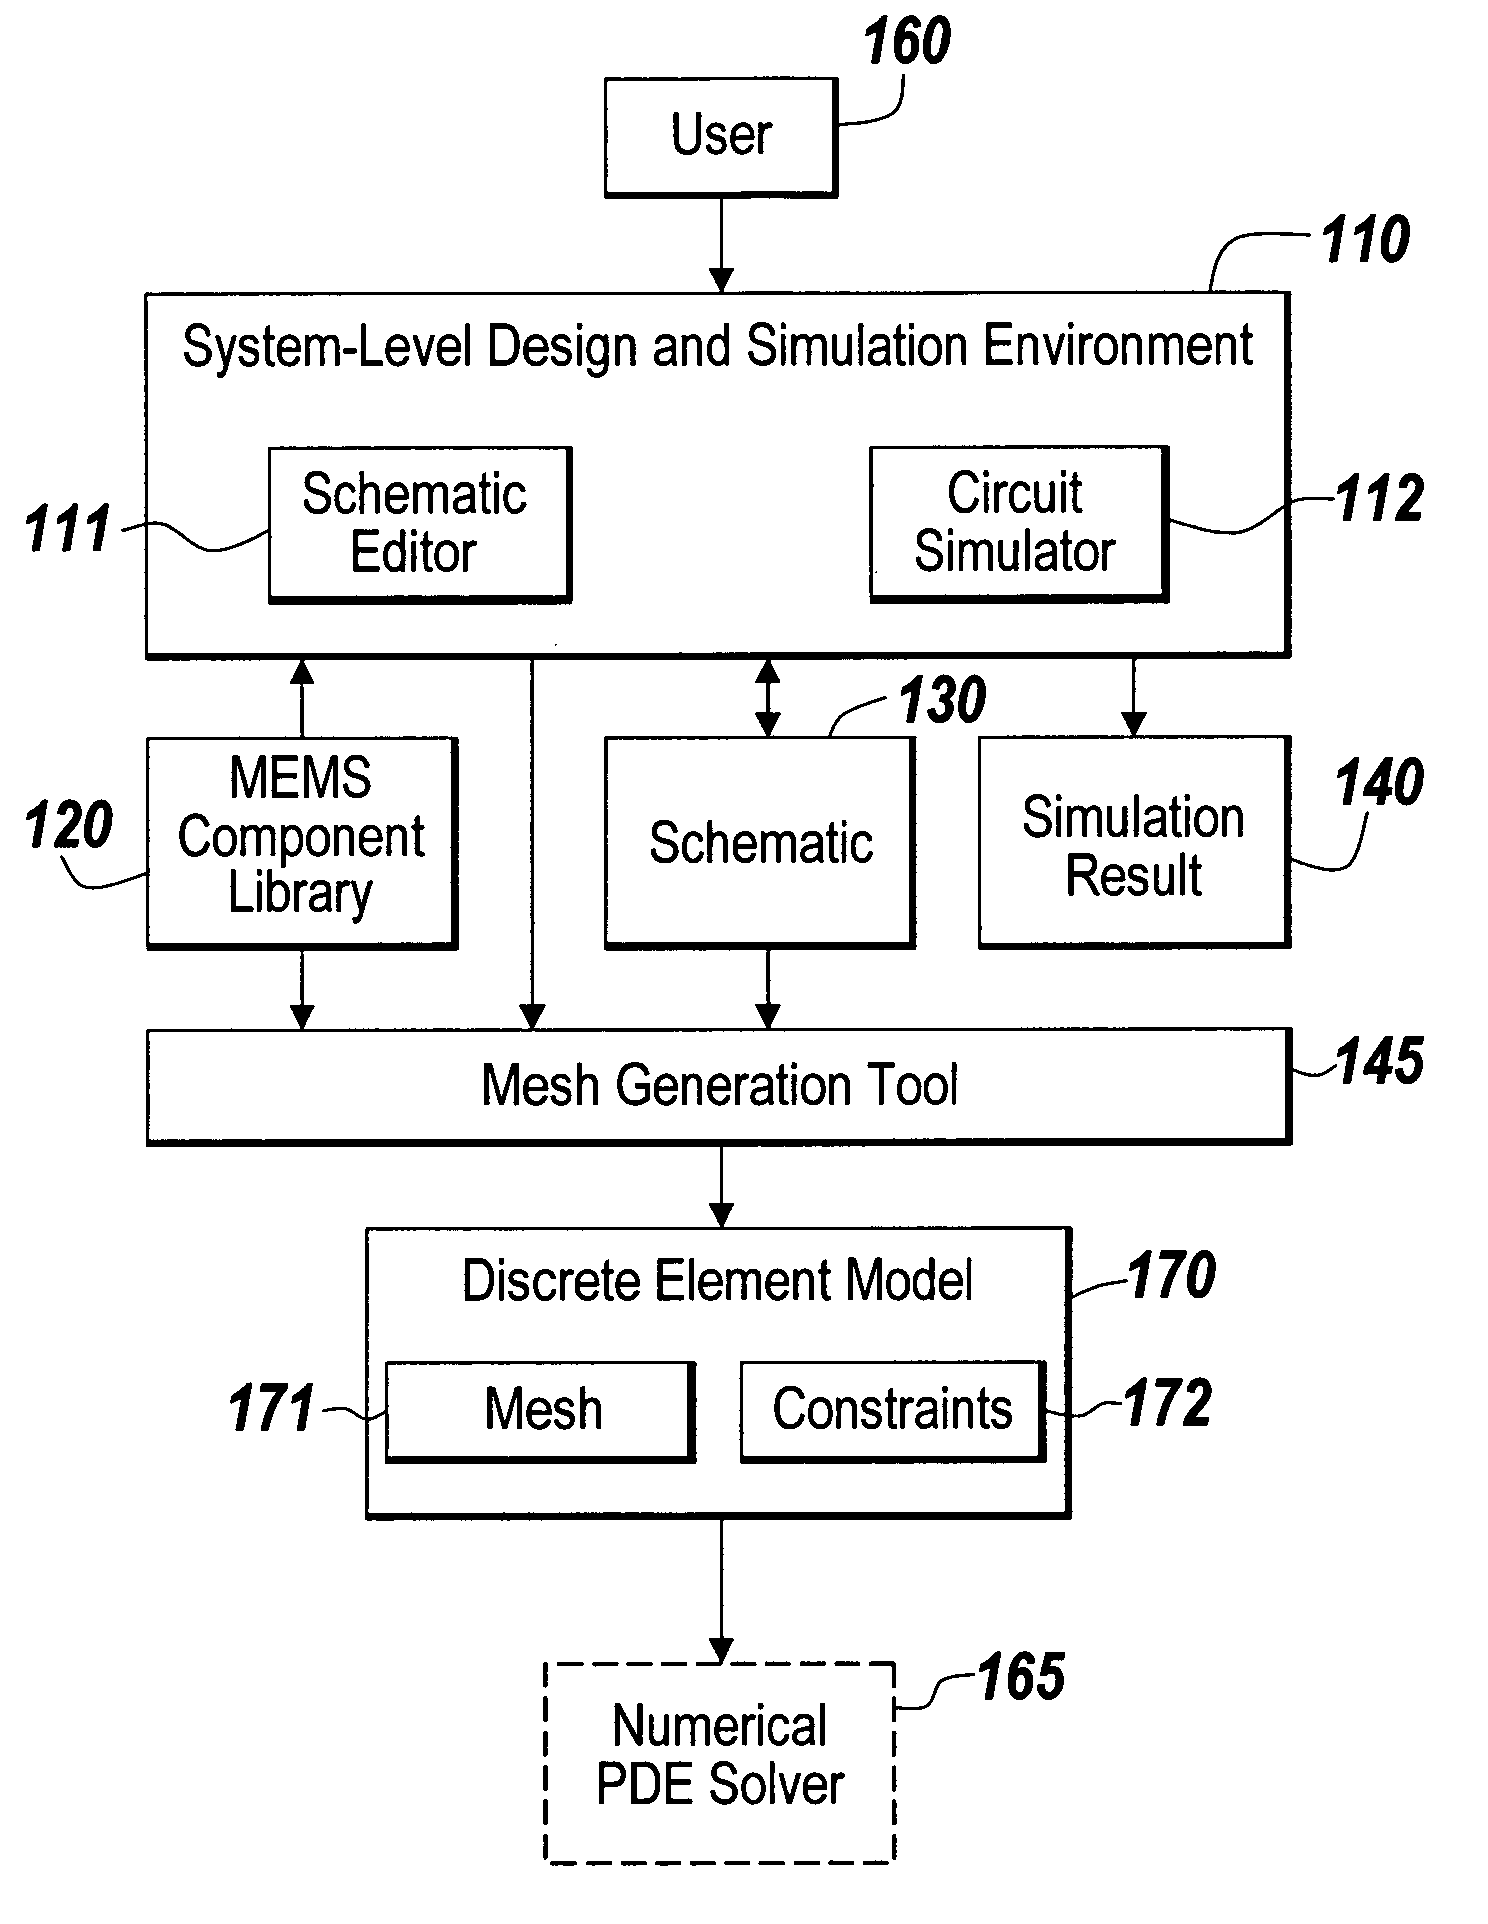 System and method for automatic mesh generation from a system-level MEMS design